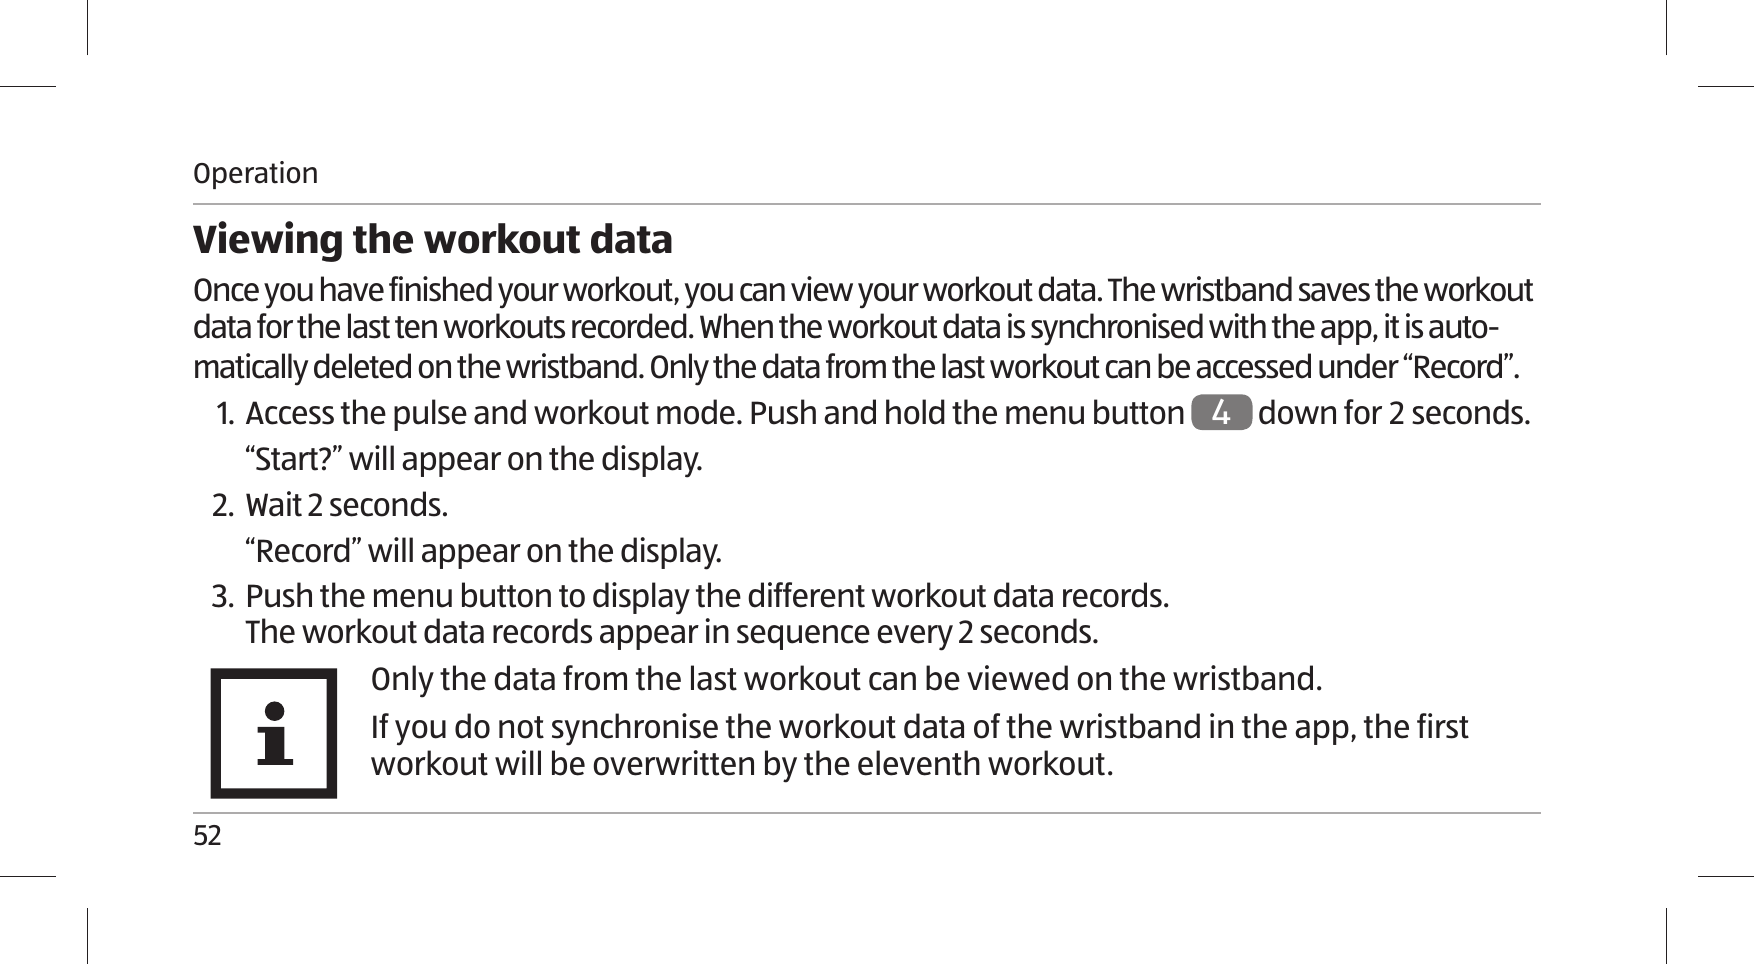 Operation52Viewing the workout dataOnce you have finished your workout, you can view your workout data. The wristband saves the workout data for the last ten workouts recorded. When the workout data is synchronised with the app, it is auto-matically deleted on the wristband. Only the data from the last workout can be accessed under “Record”. 1. Access the pulse and workout mode. Push and hold the menu button 4 down for  seconds.“Start?” will appear on the display.2. Wait 2 seconds.“Record” will appear on the display.3. Push the menu button to display the different workout data records.The workout data records appear in sequence every 2 seconds.Only the data from the last workout can be viewed on the wristband.If you do not synchronise the workout data of the wristband in the app, the first workout will be overwritten by the eleventh workout.